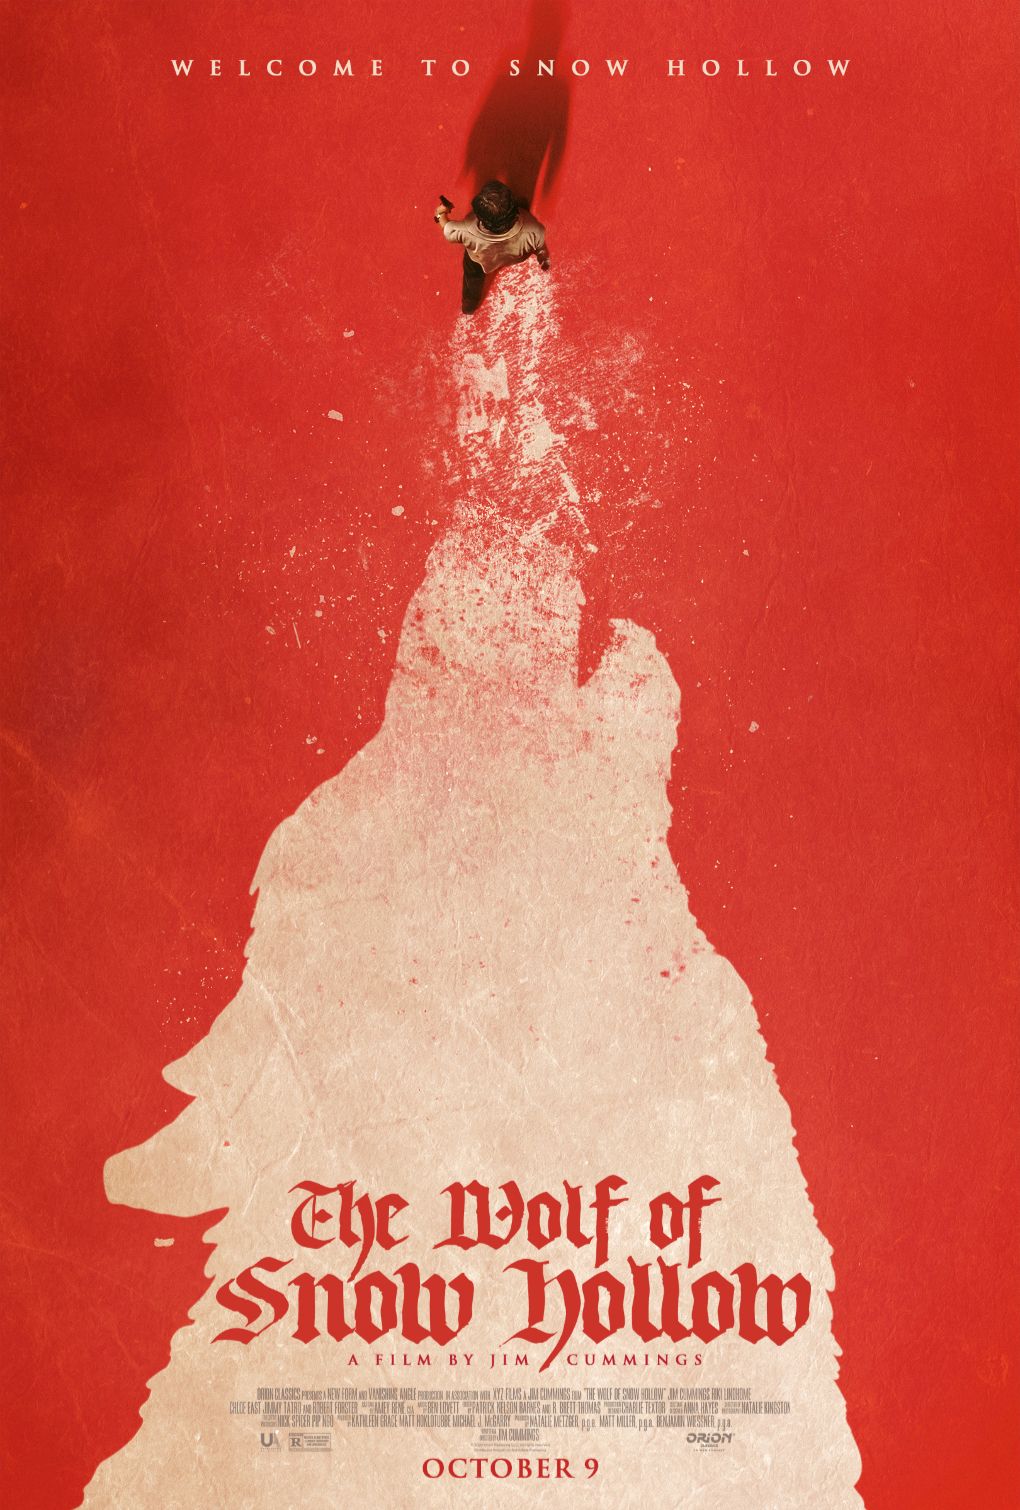 The Wolf of Snow Hallow